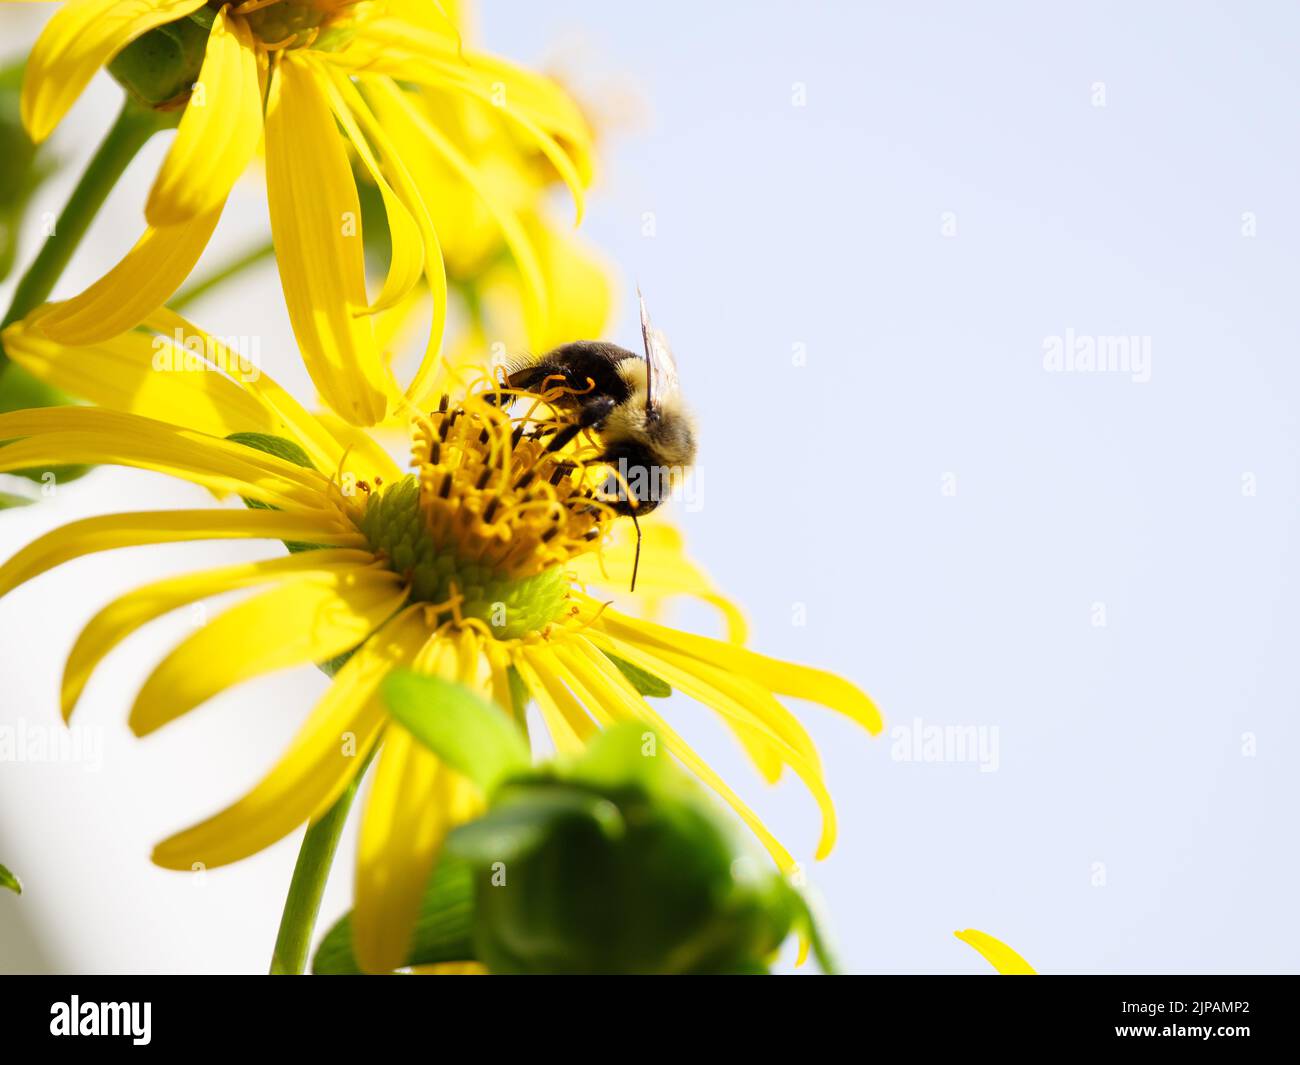 Bumble bee on cup plant flower. Stock Photo